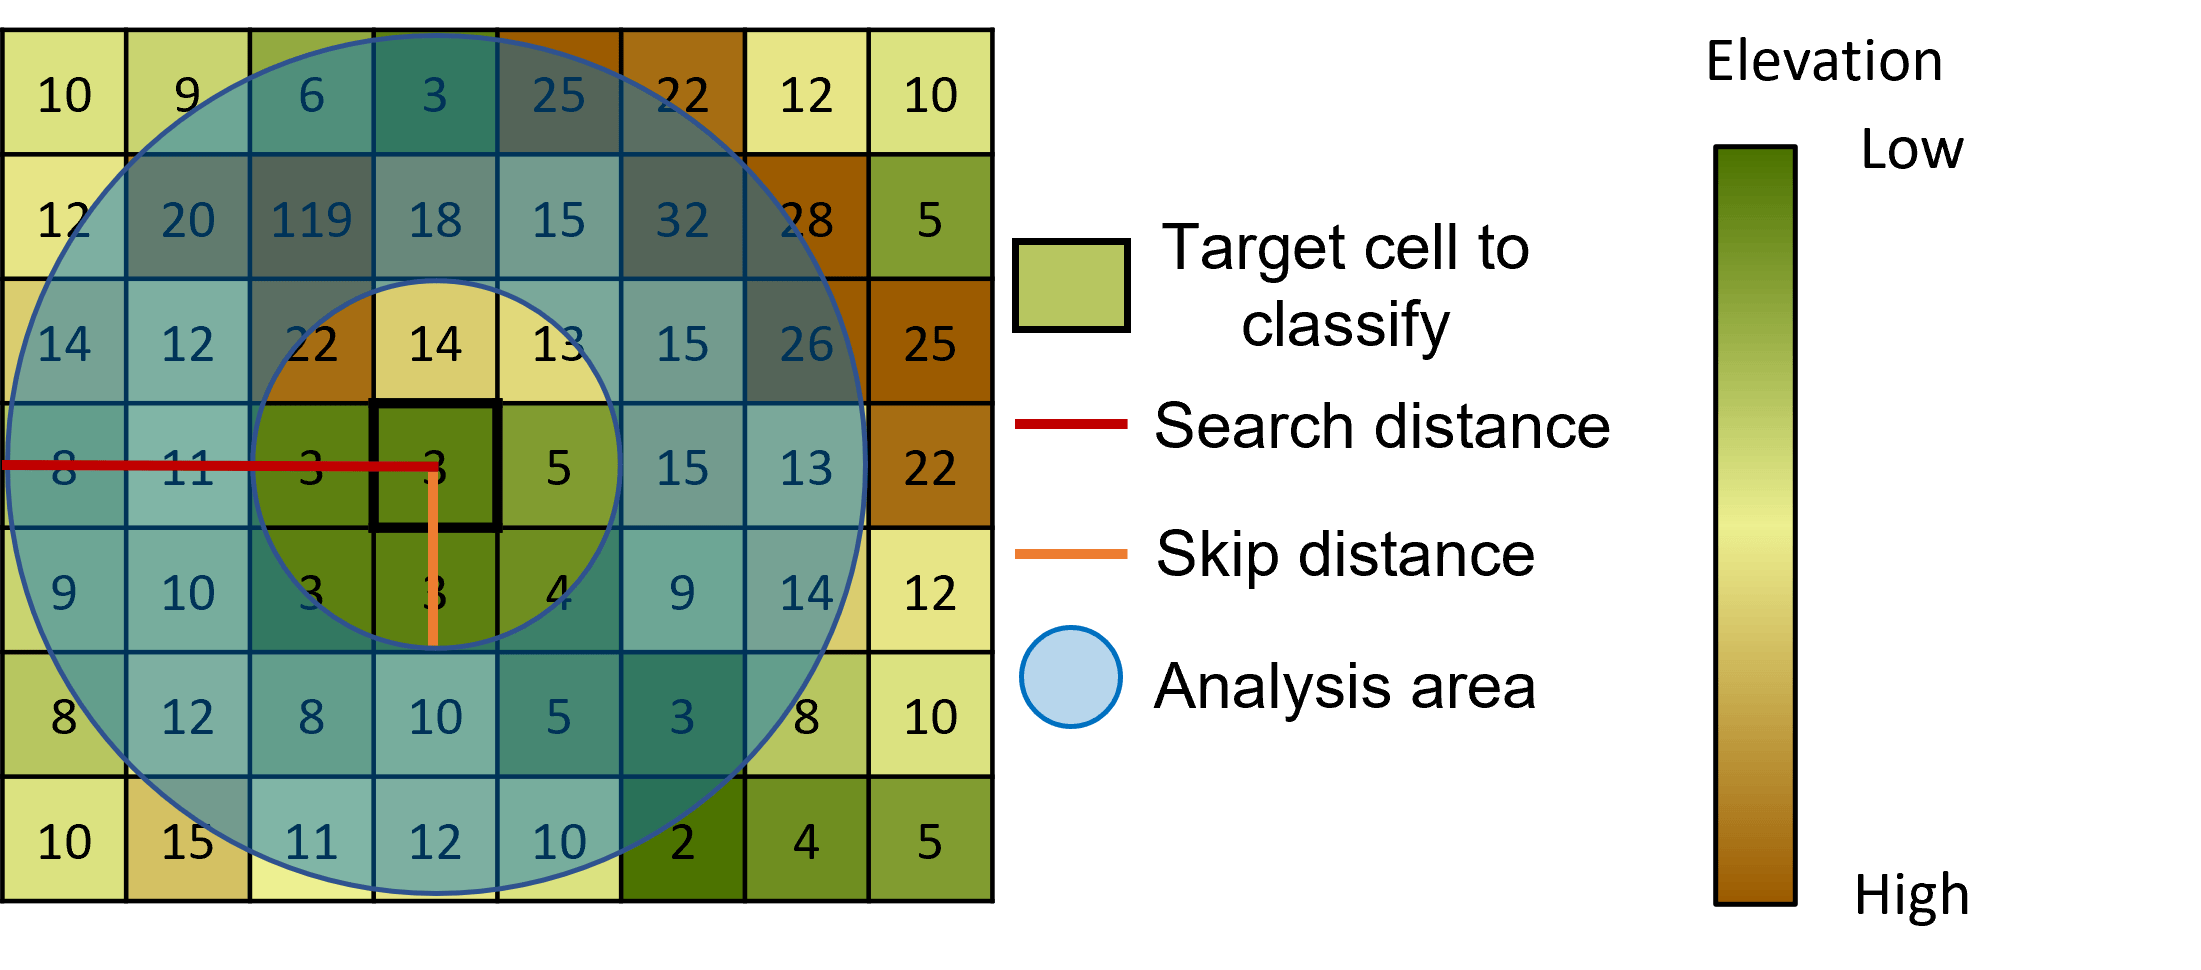 Analysis area for each target cell